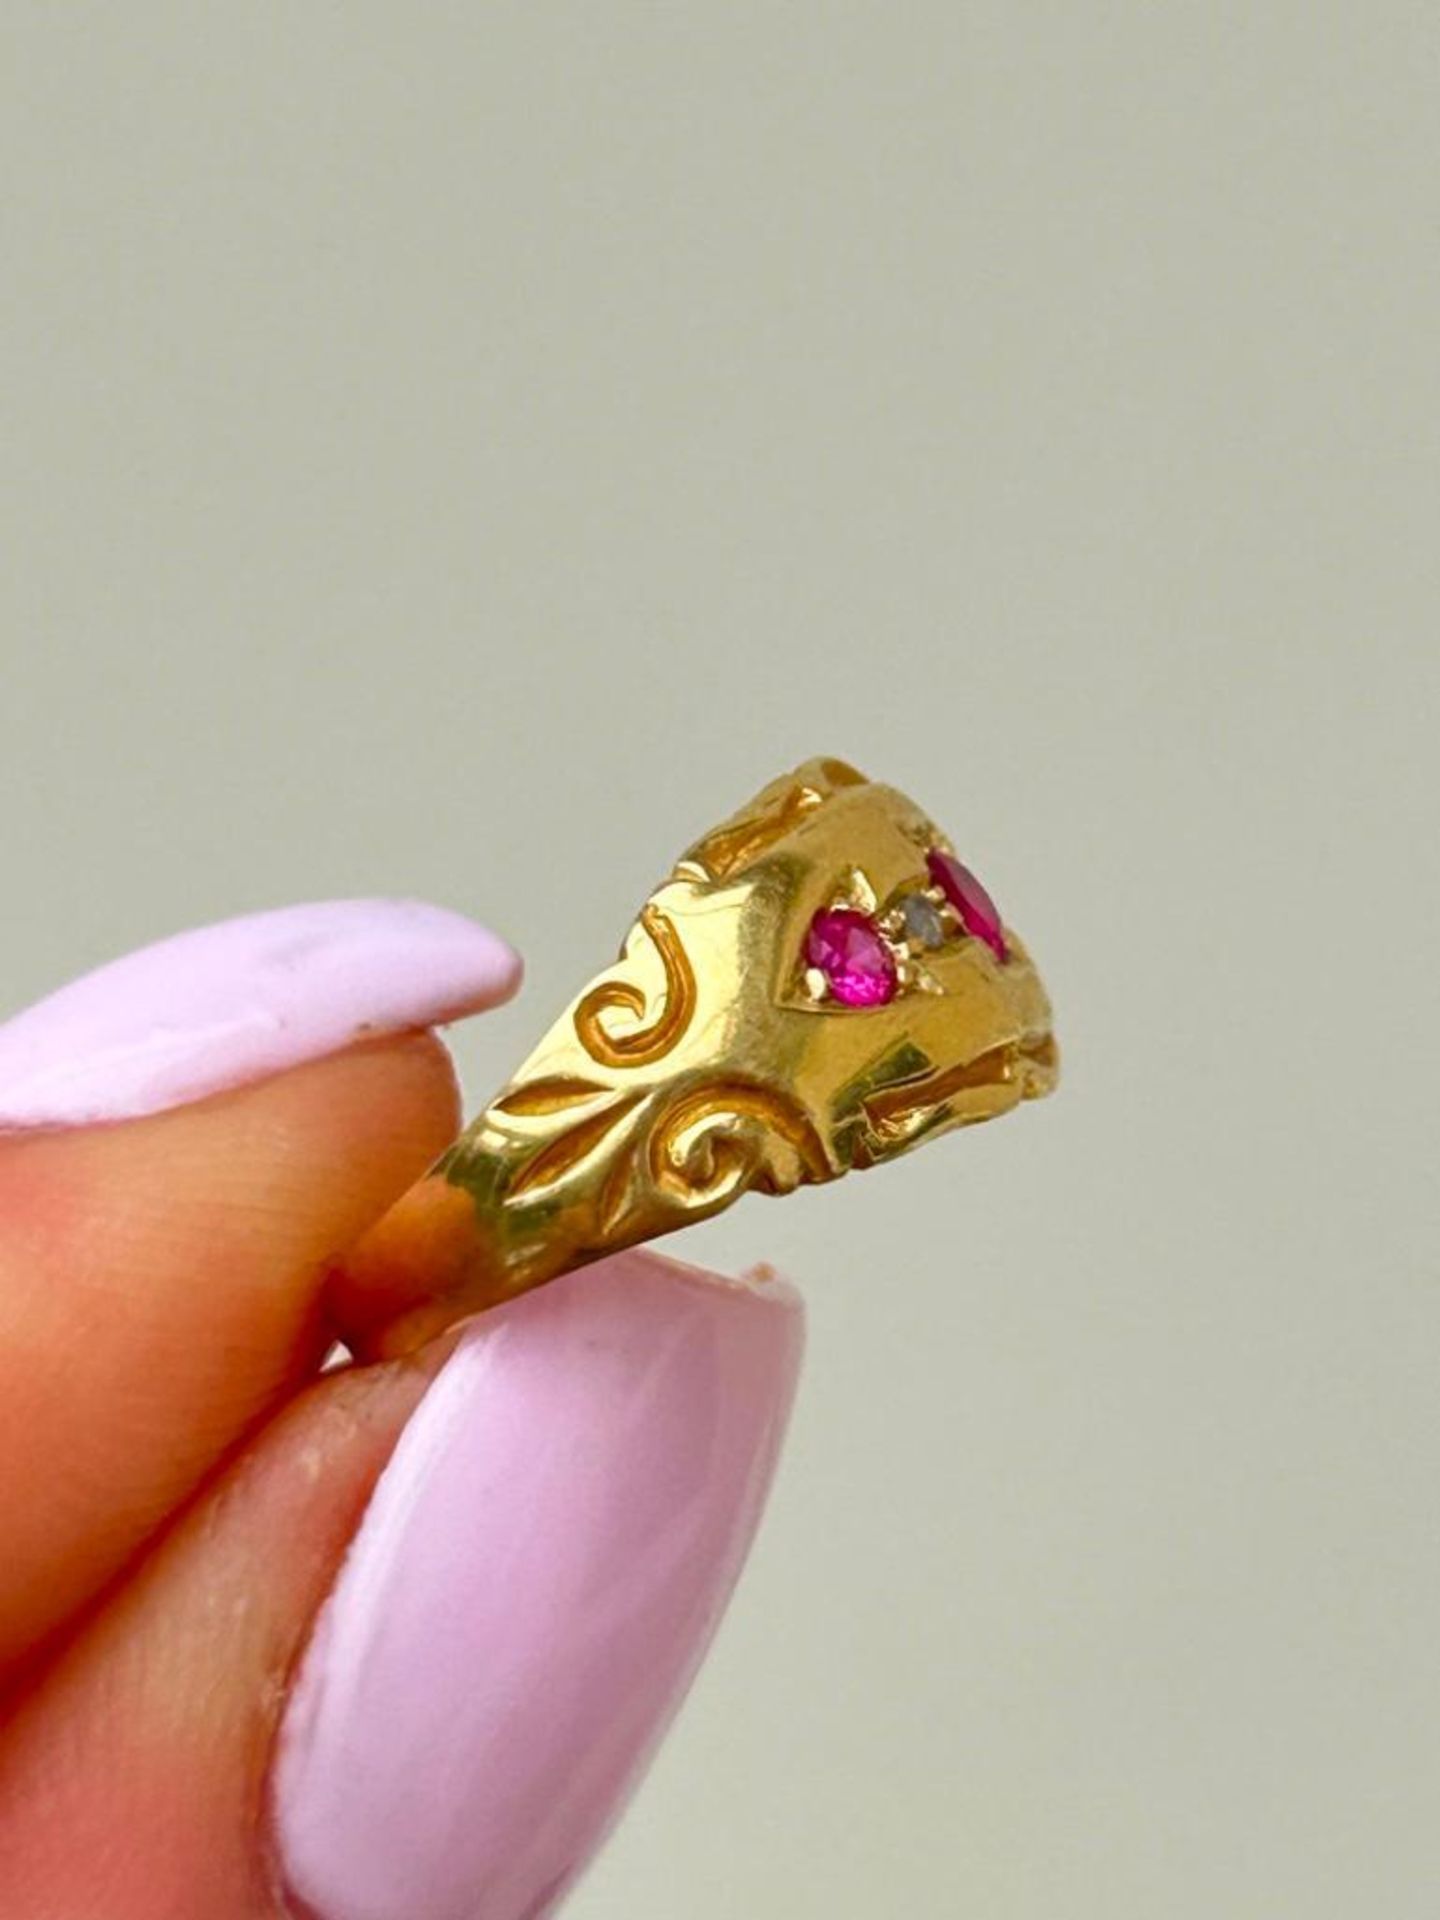 Amazing 18ct Yellow Gold Ruby and Diamond Ring - Image 6 of 8